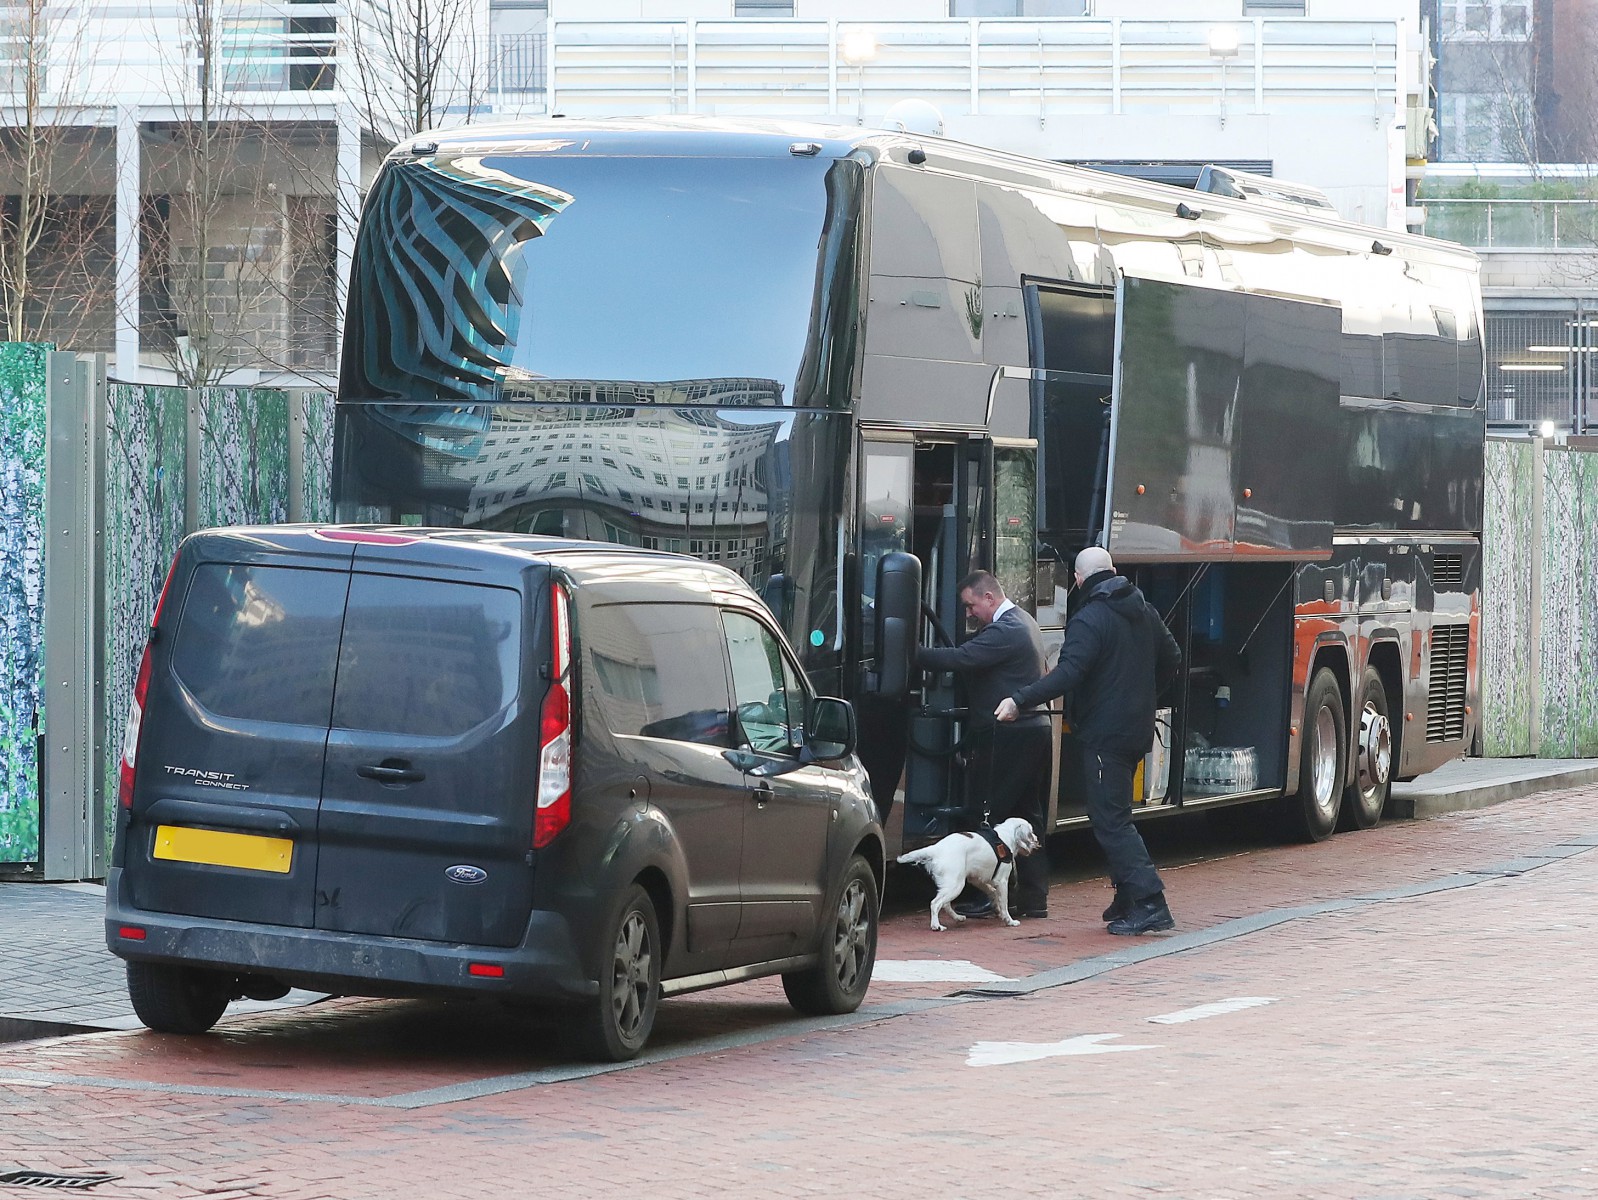 , Man Utd coach checked by sniffer dog amid security fears as Solskjaers squad leave The Lowry for Liverpool clash